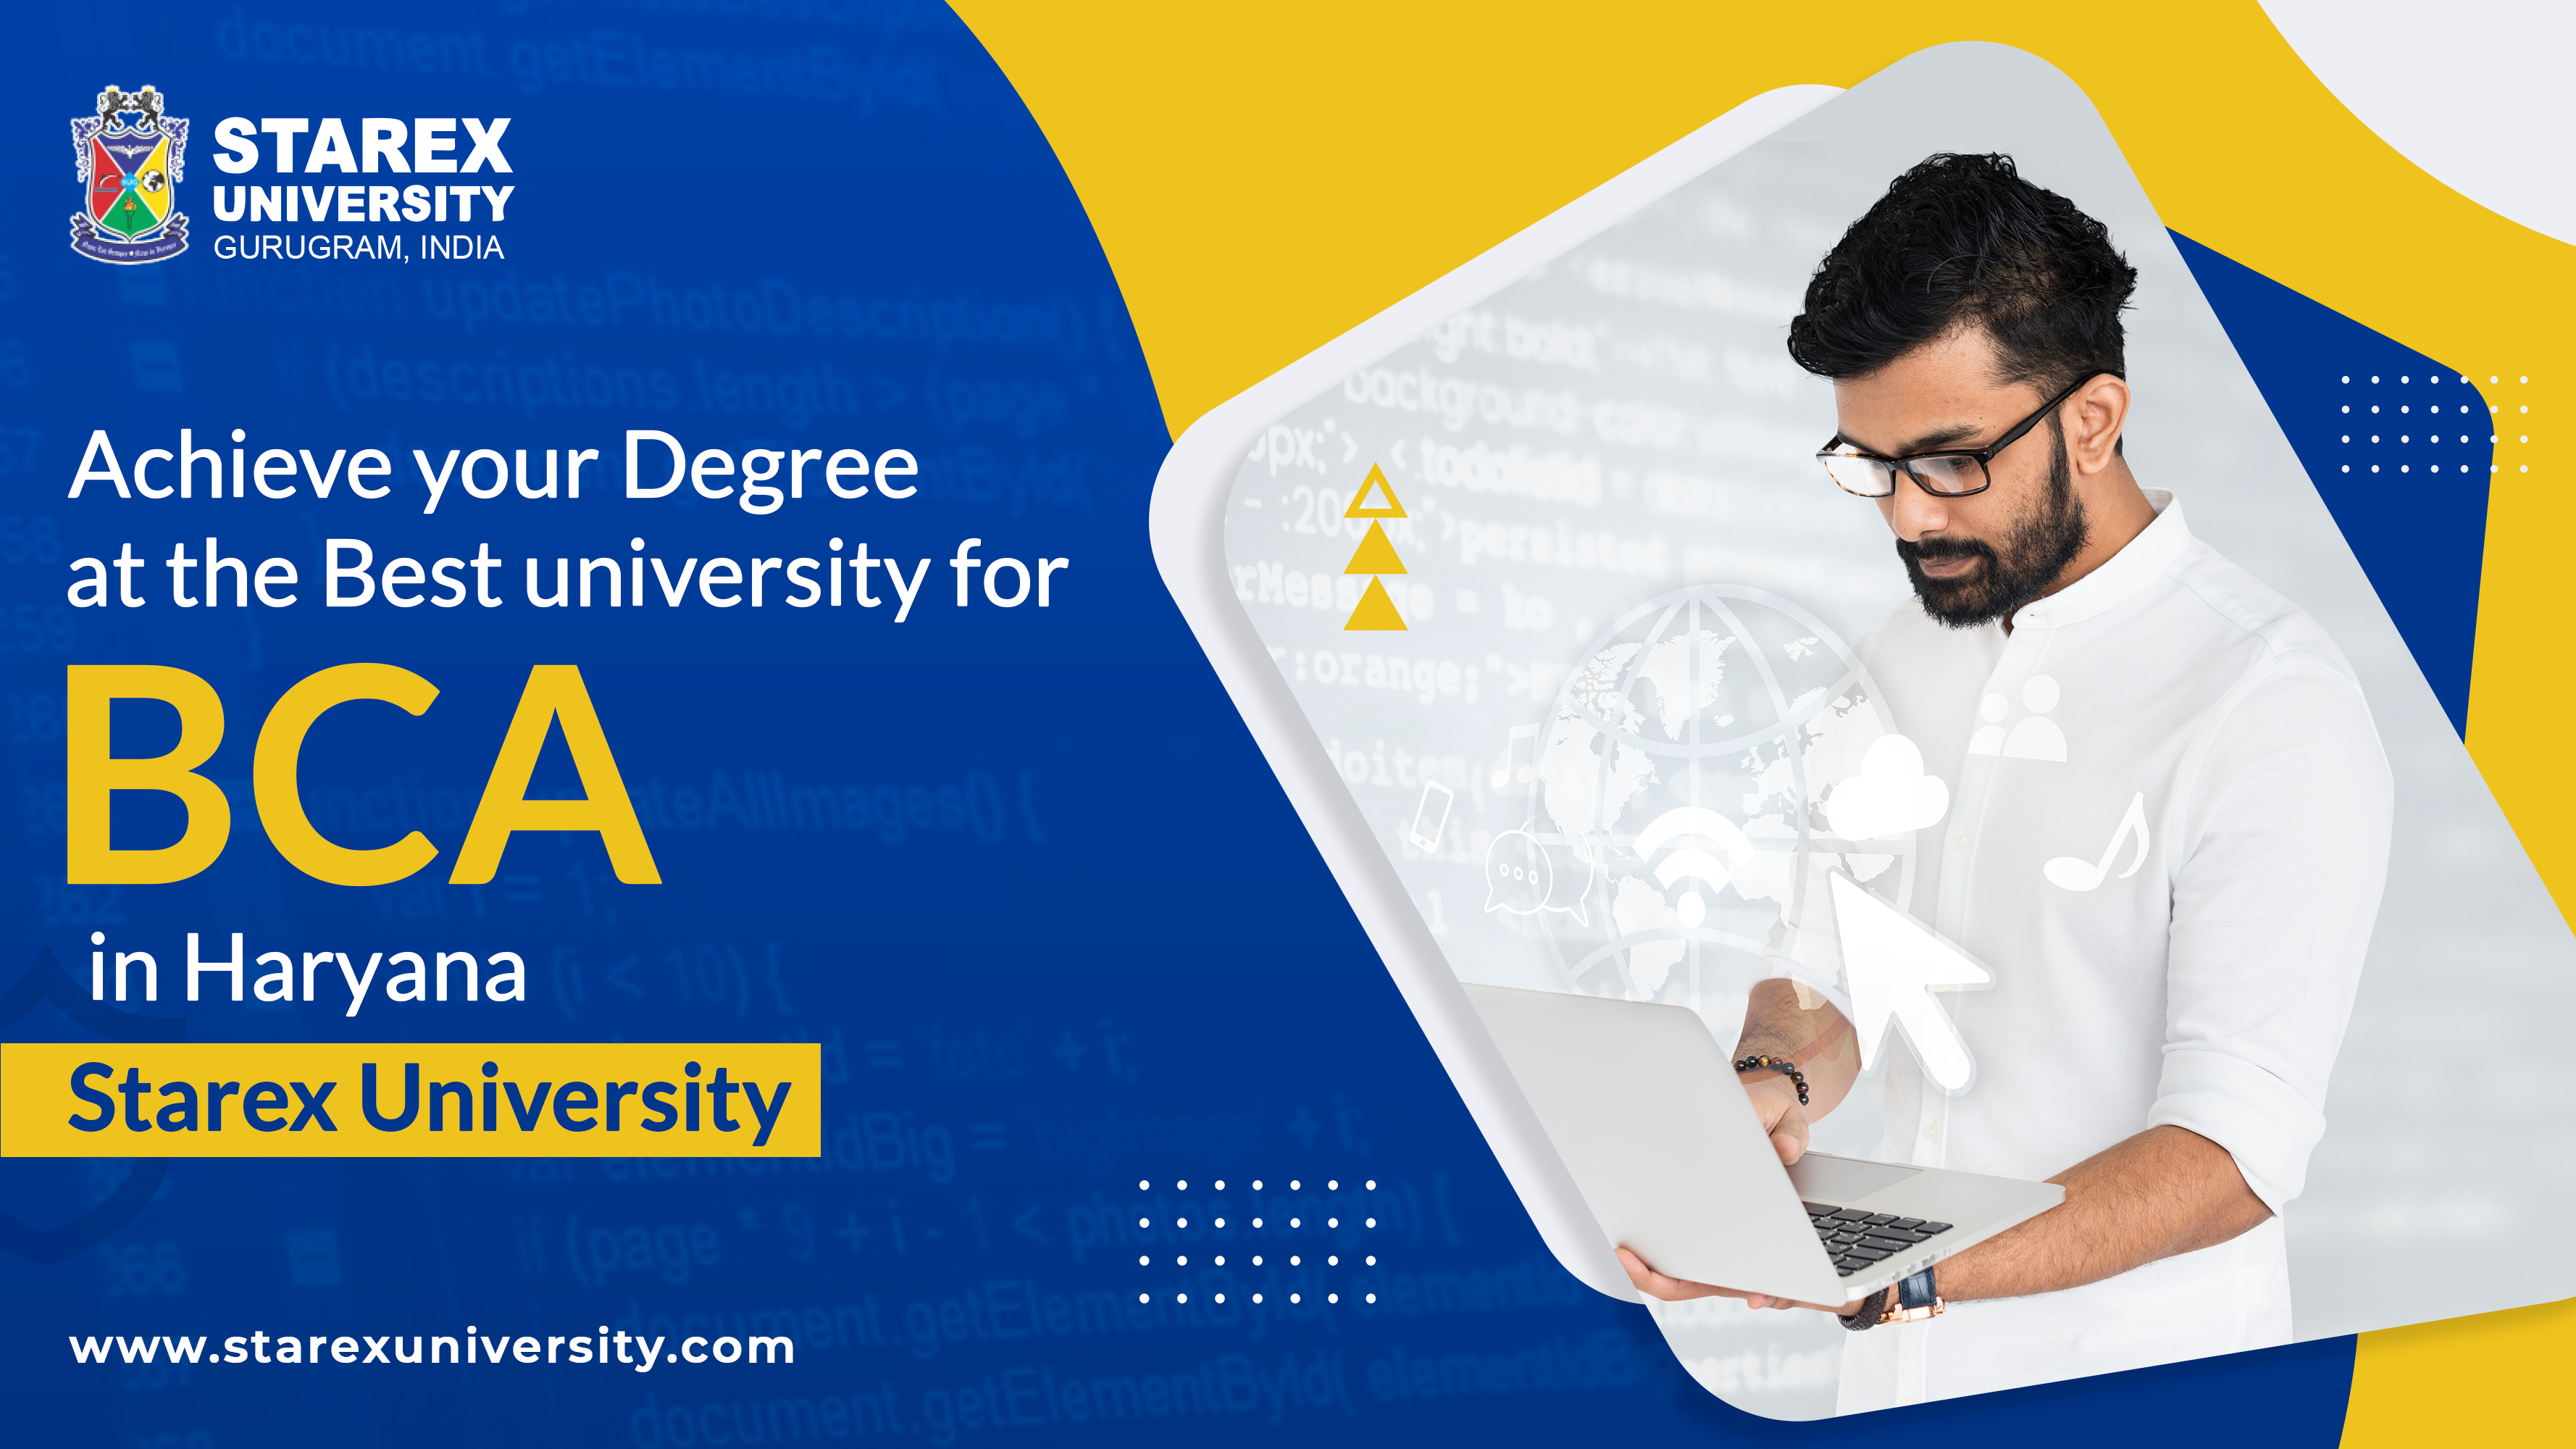 Achieve your Degree at the Best University For BCA In Haryana - Starex University